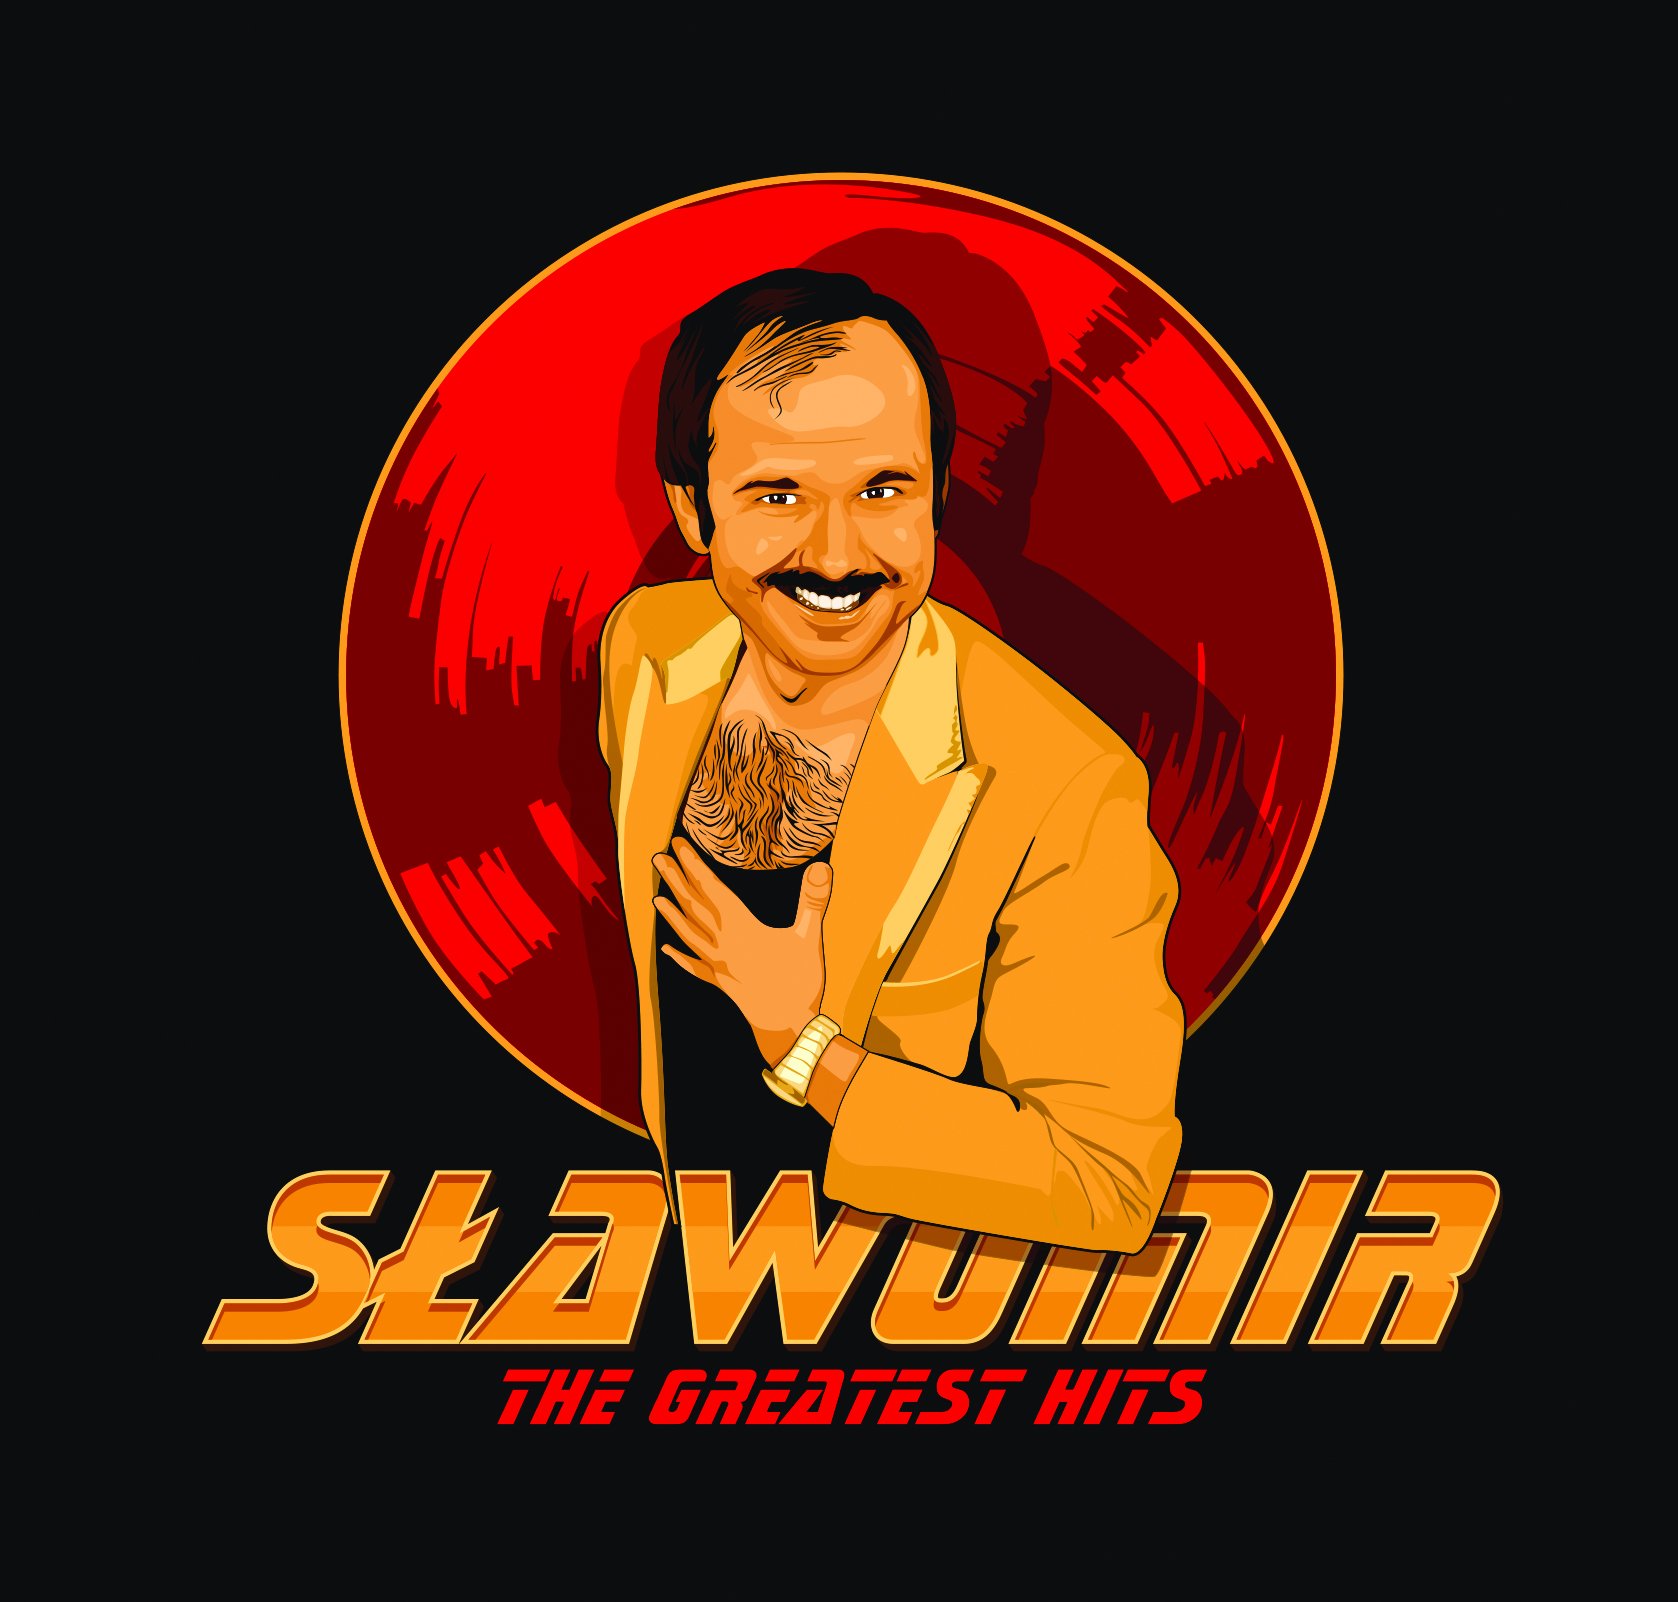 Sławomir – The Greatest Hits